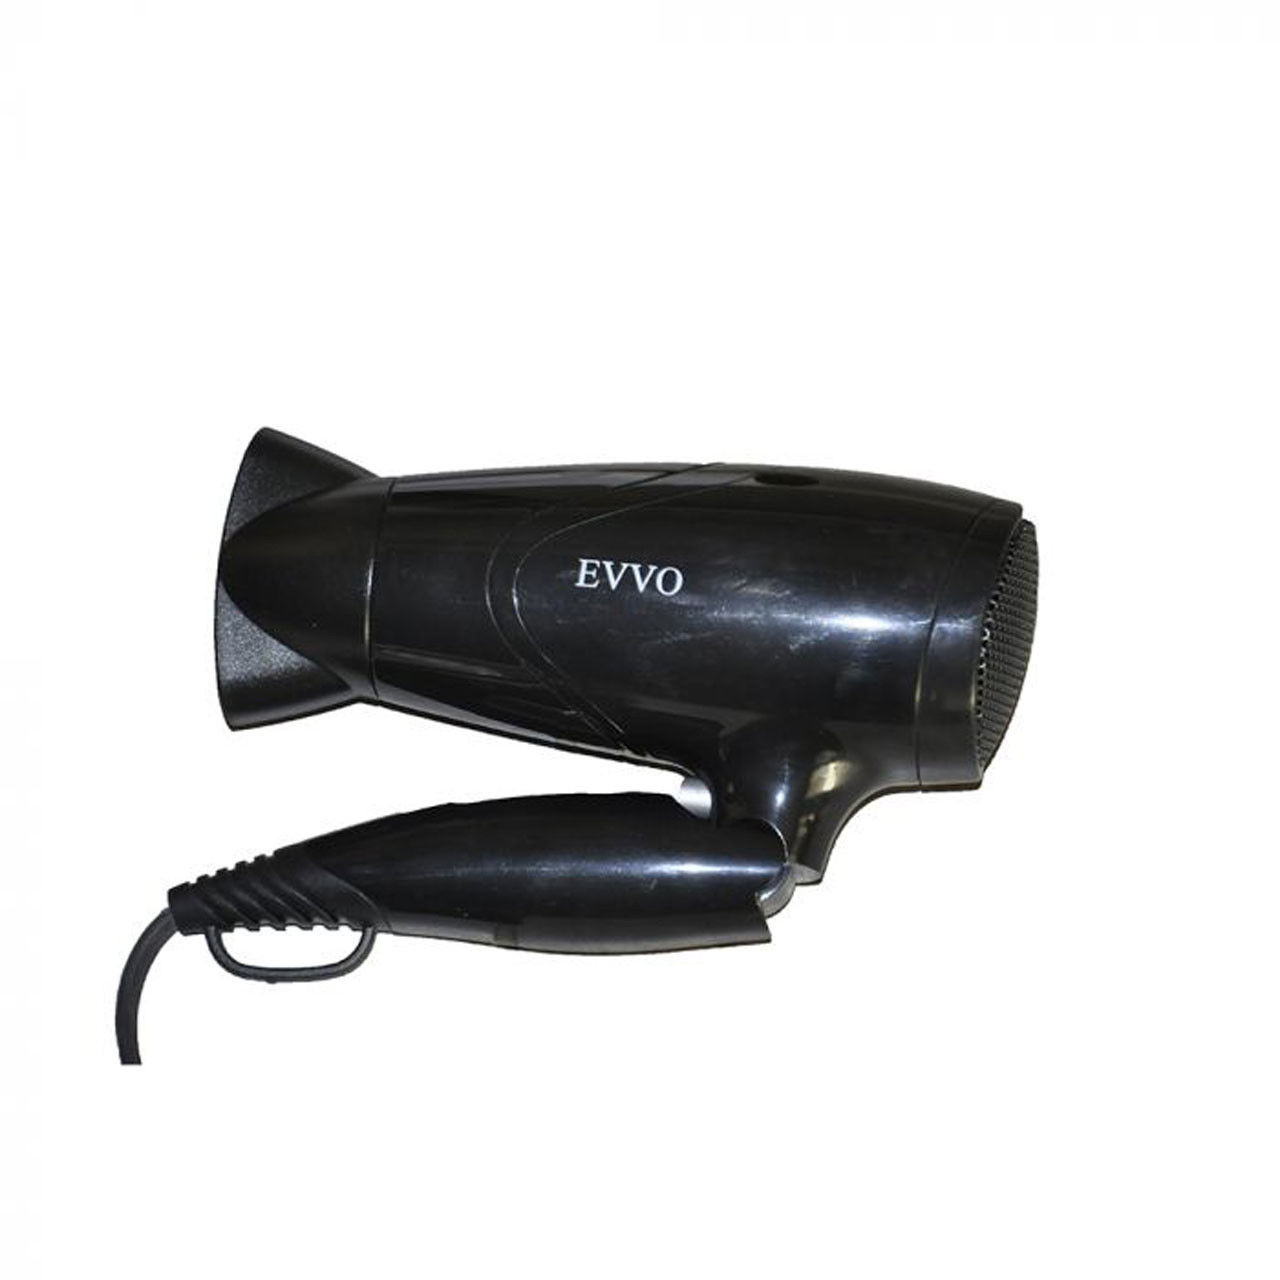 Is the hair dryer 1600 watt suitable for use in hotels?